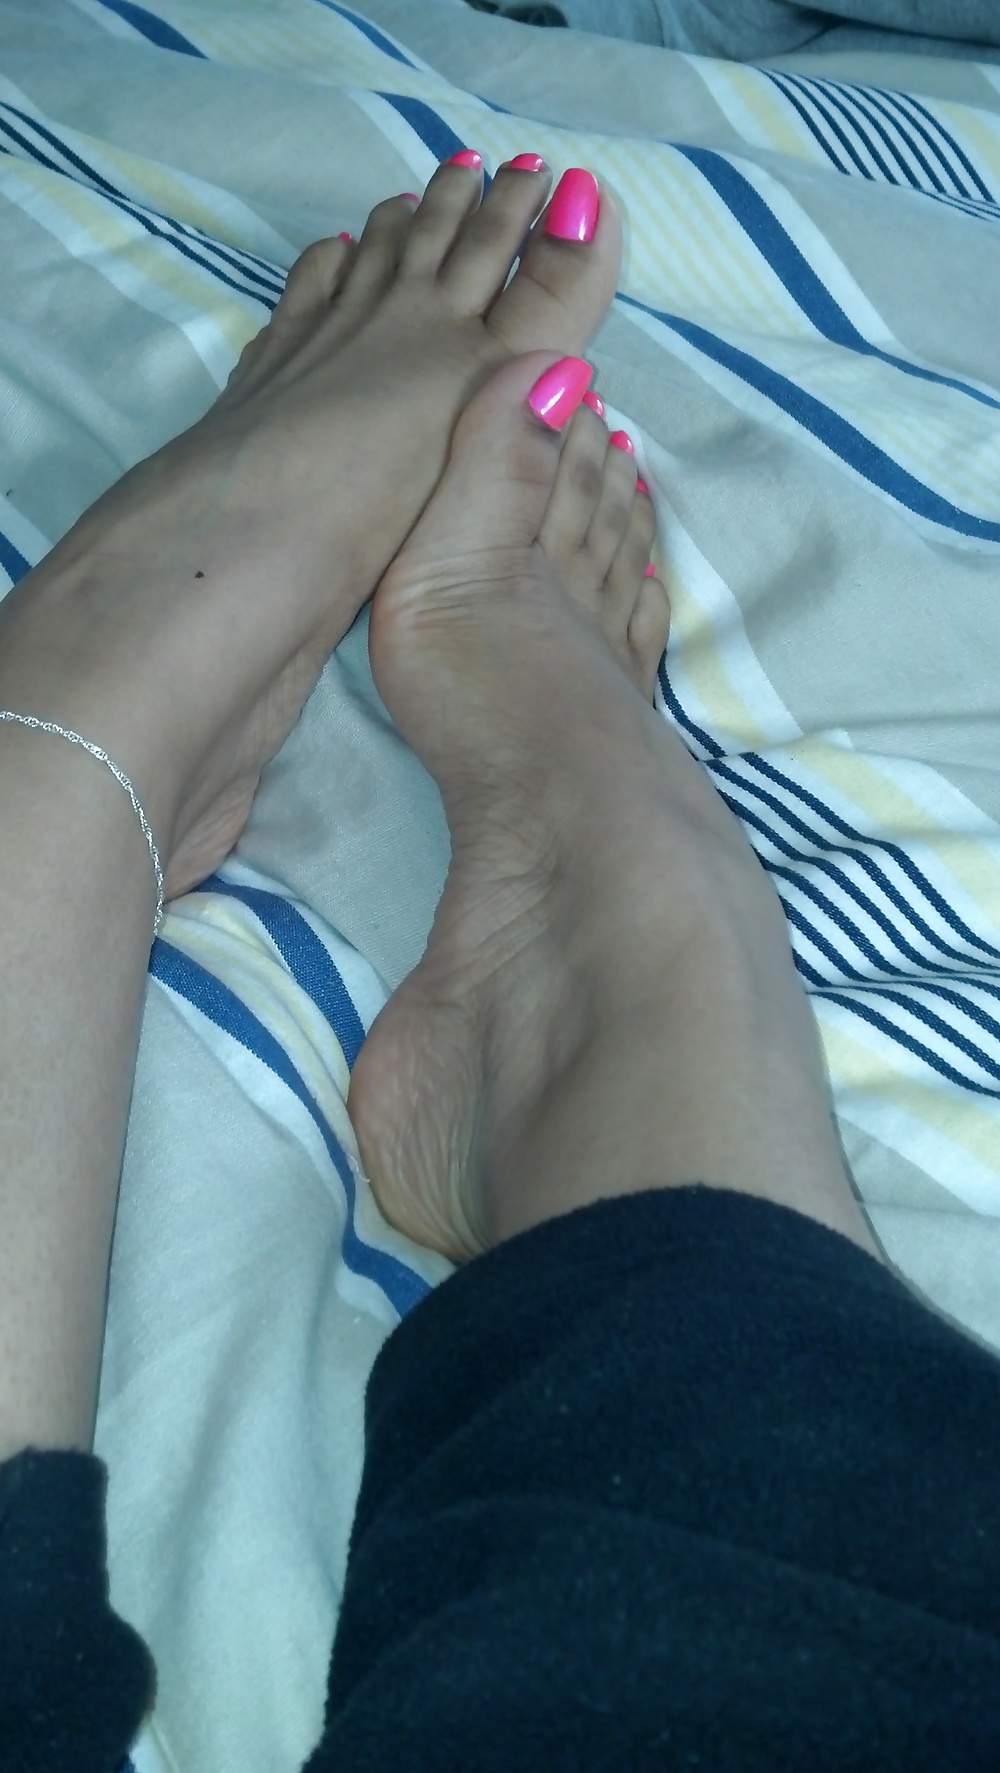 Sexy Feet & Heels I Like porn pictures